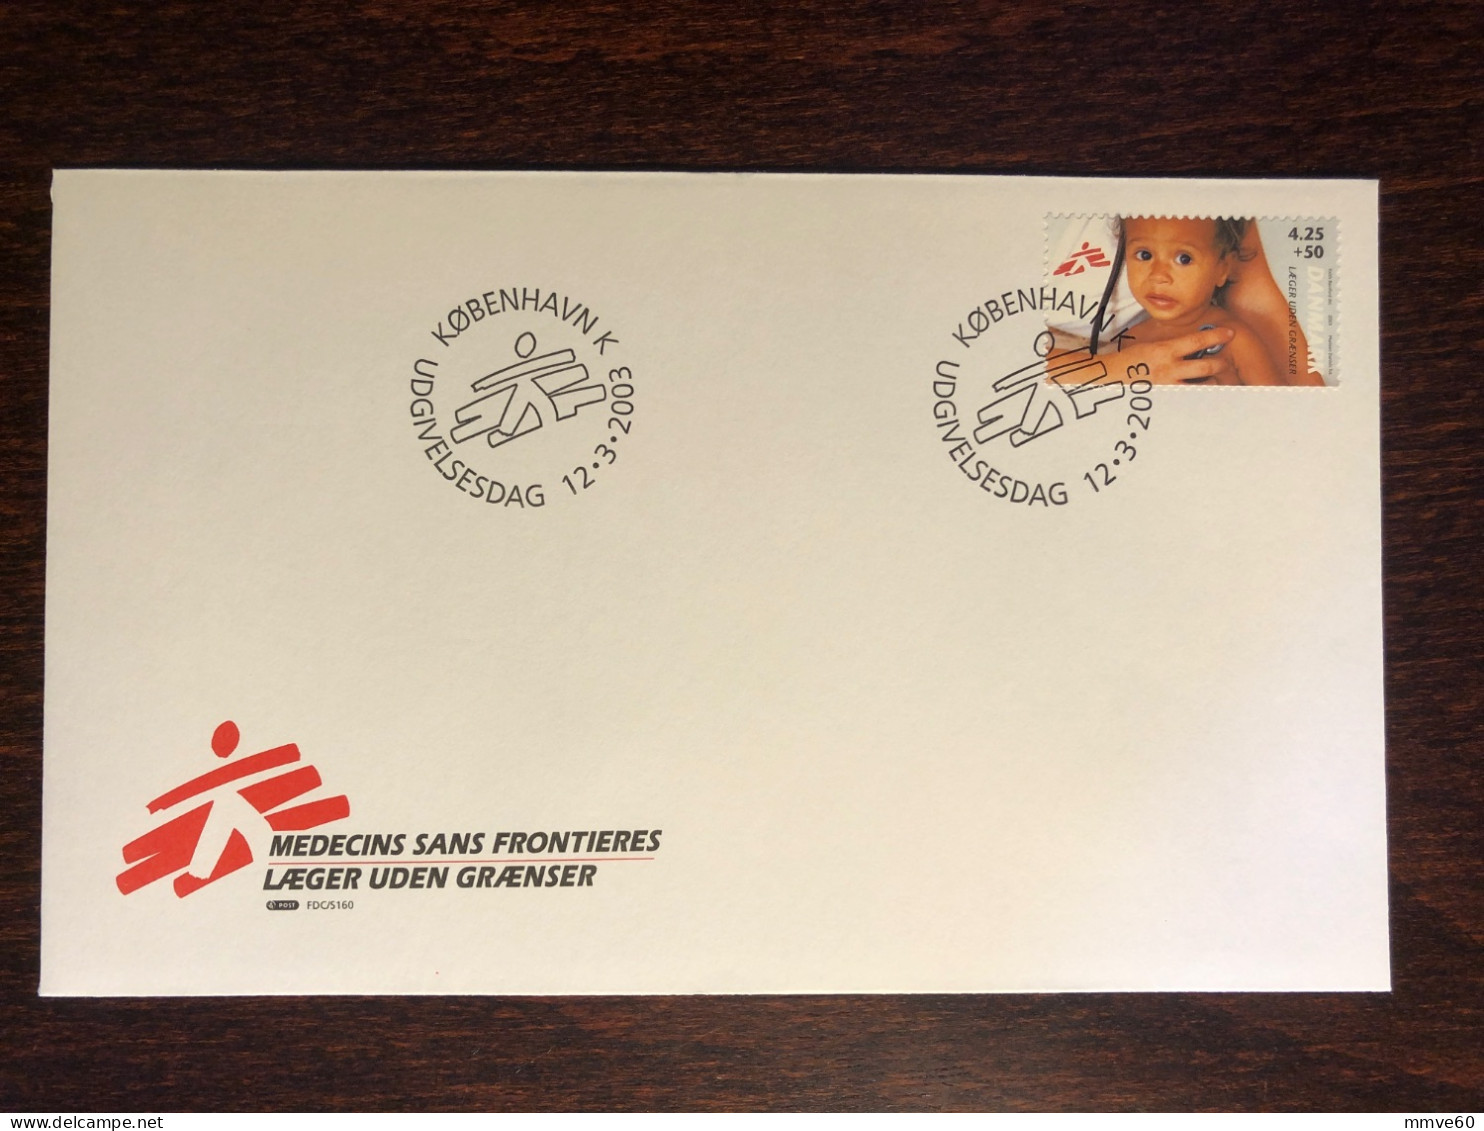 DENMARK FDC COVER 2003 YEAR DOCTOR WITHOUT BORDERS HEALTH MEDICINE STAMPS - FDC